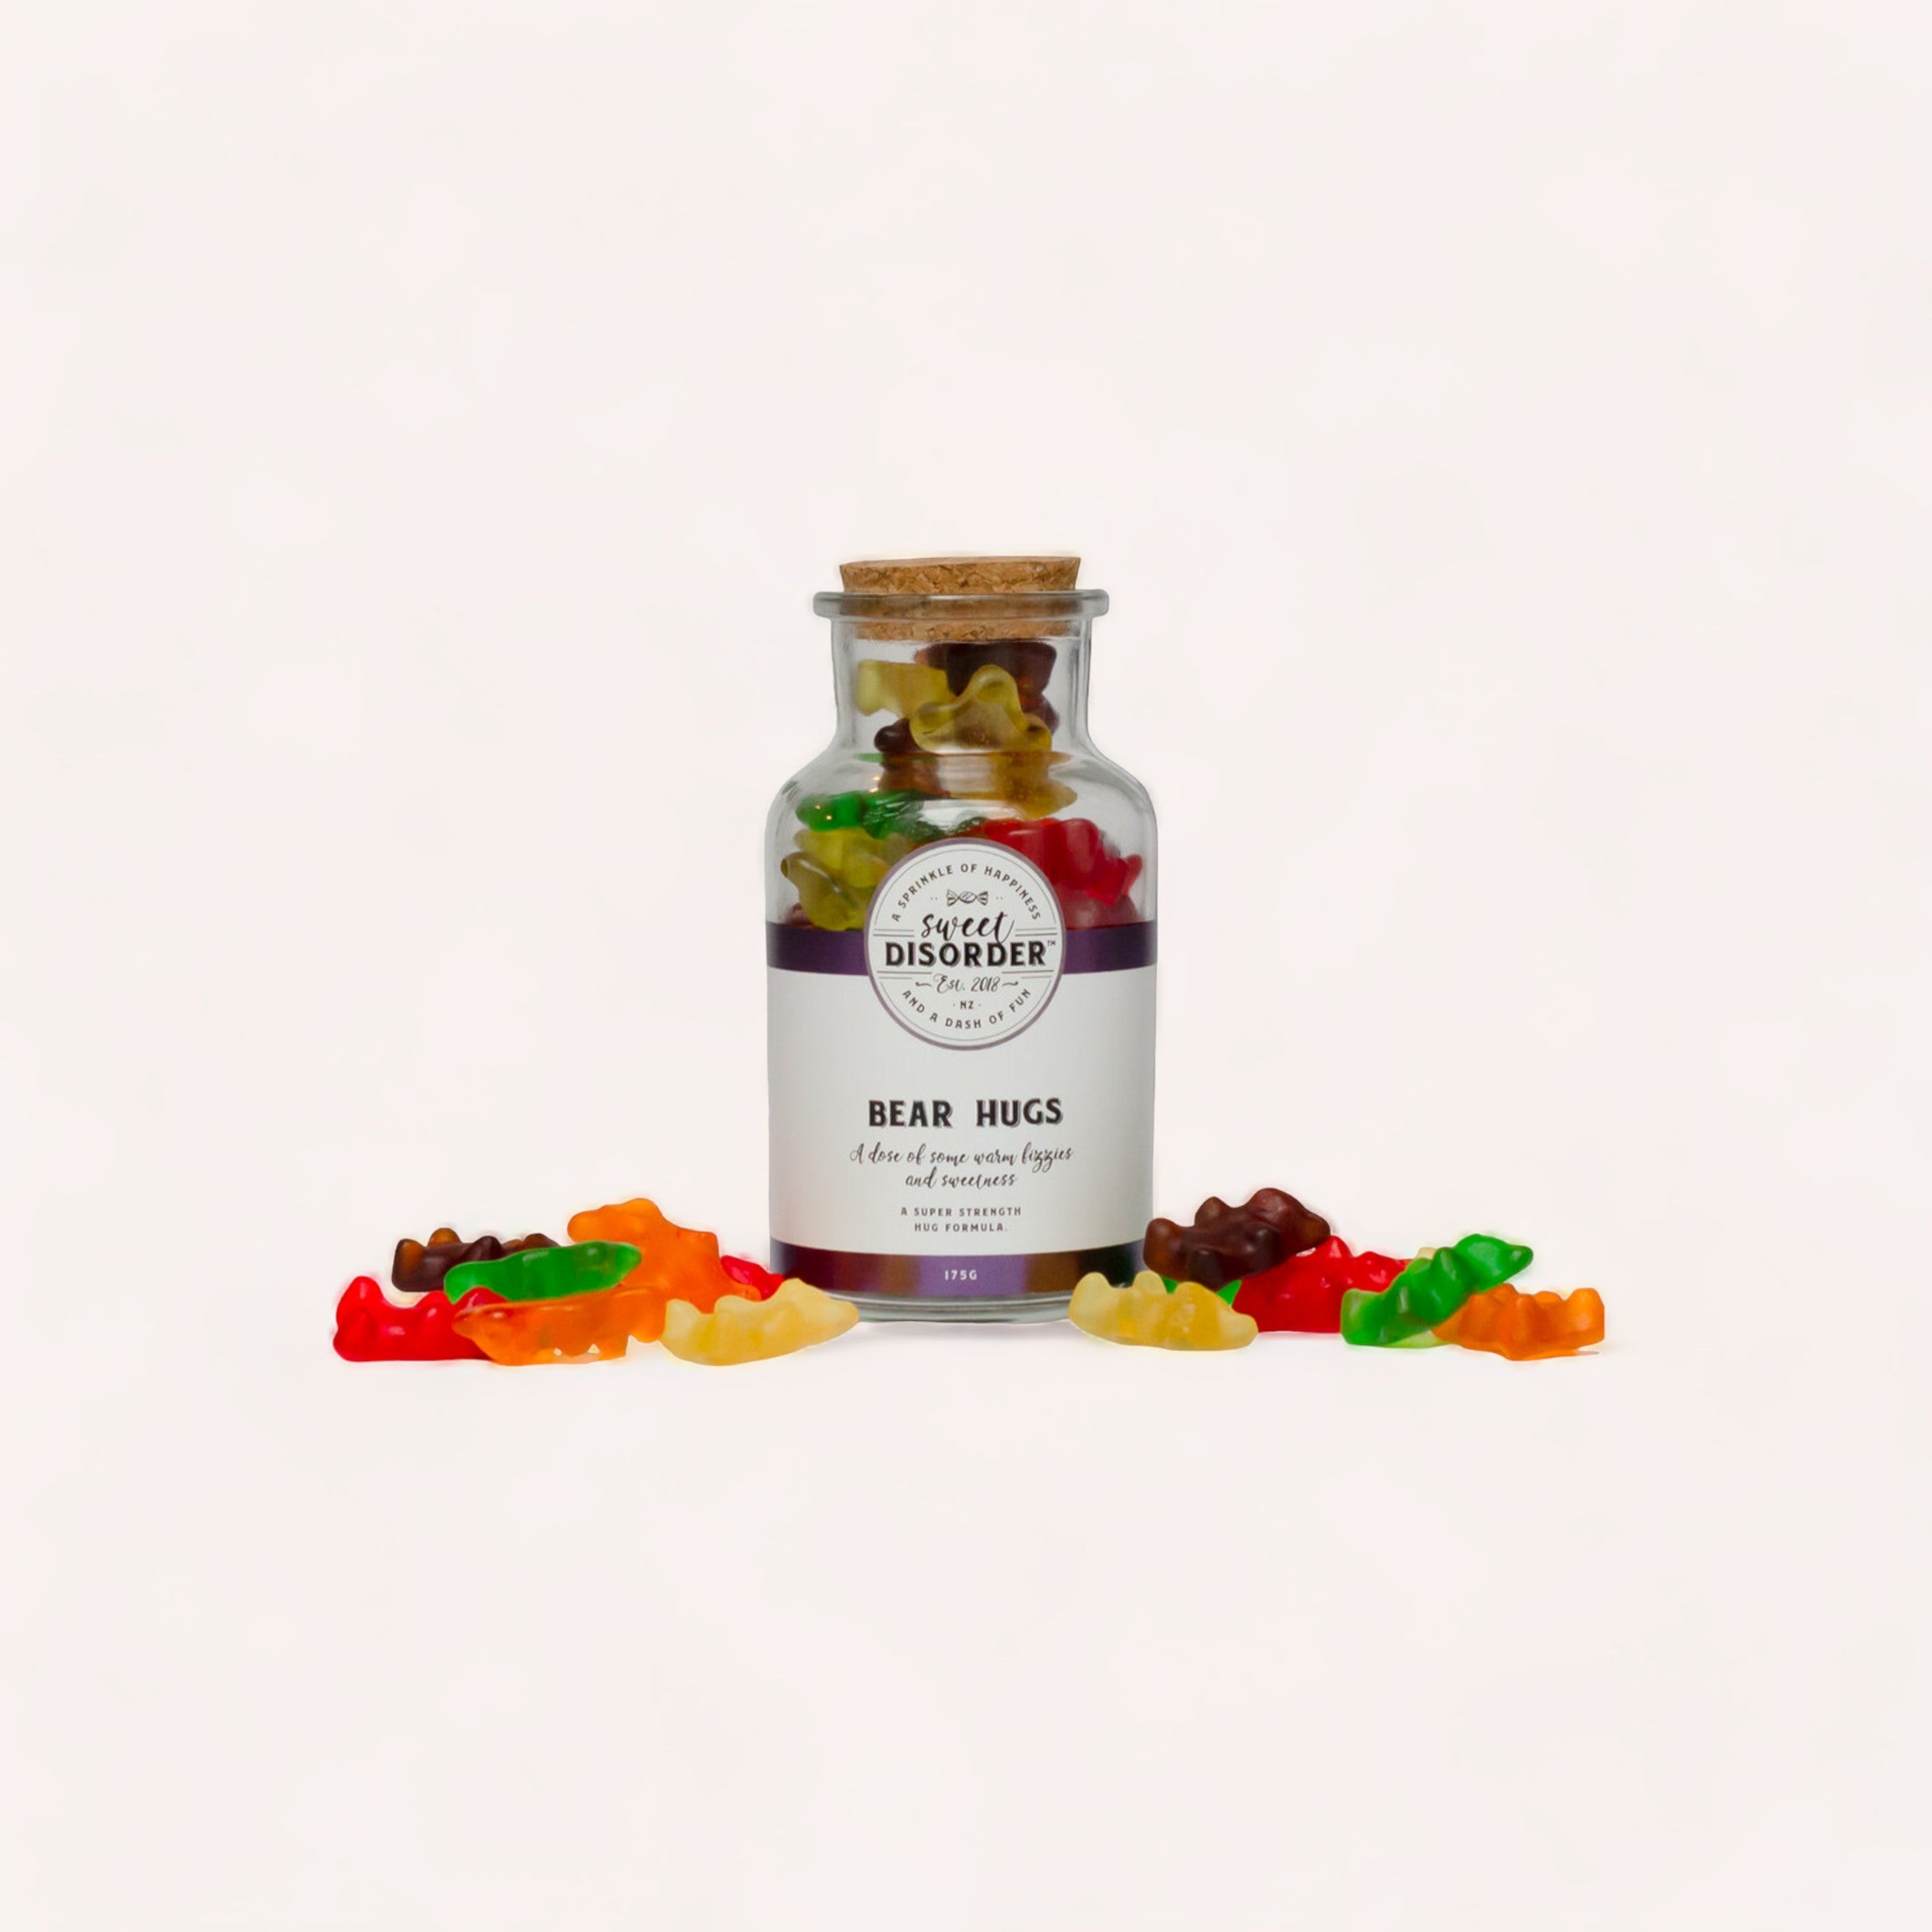 A clear glass jar labeled "Bear Hugs Lollies" by Sweet Disorder filled with colorful gummy bears, with more gummies scattered around the jar on a white background.